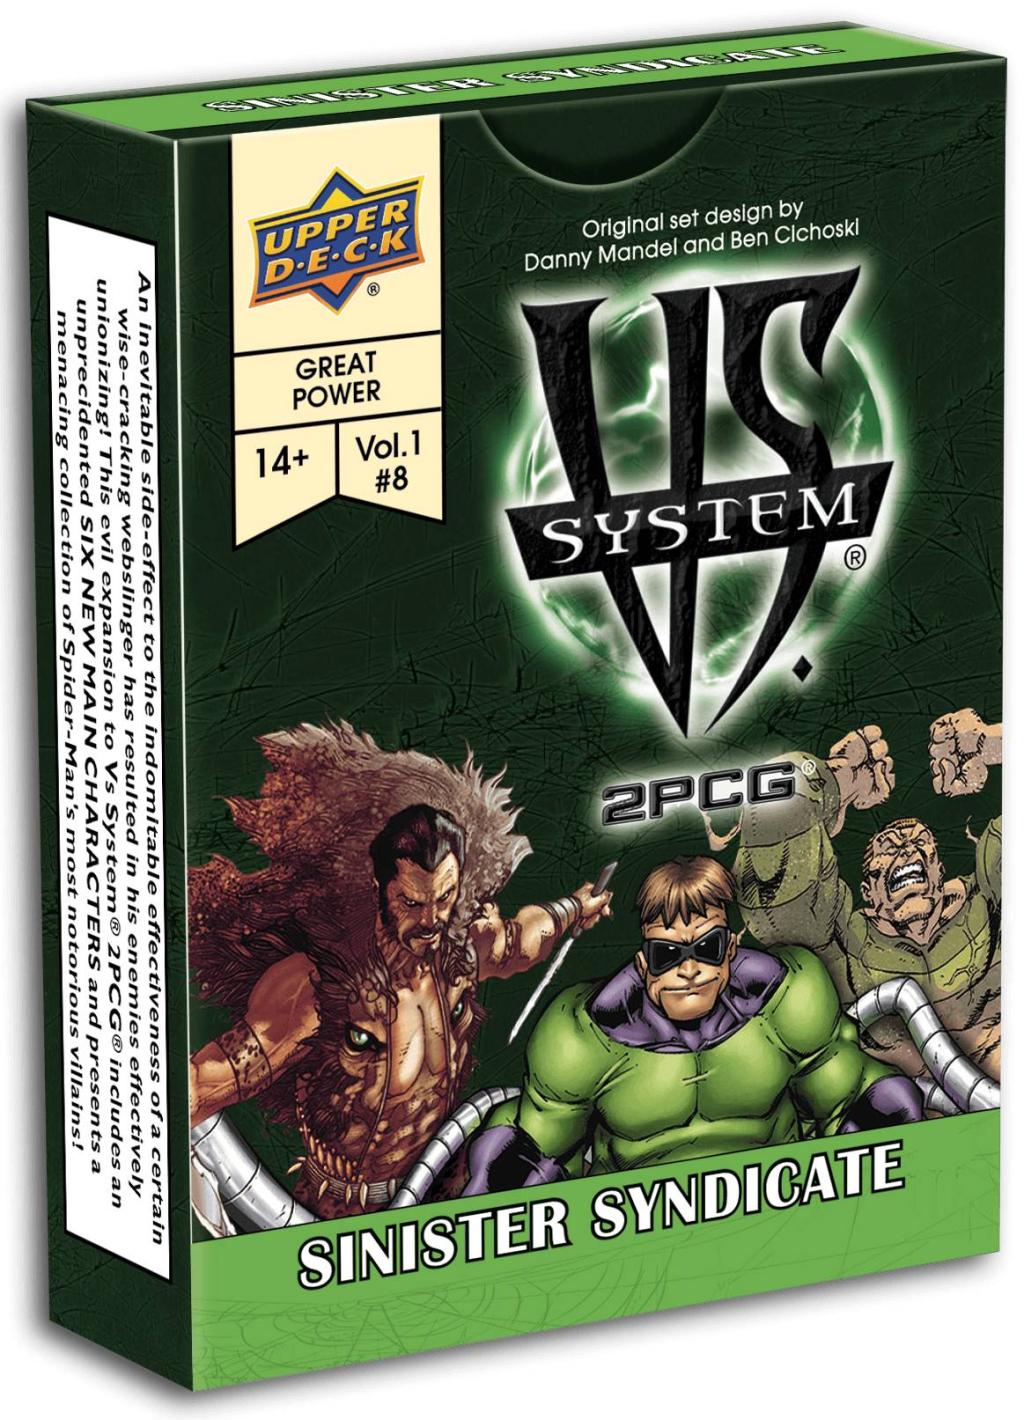 Vs. System 2PCG: Sinister Syndicate